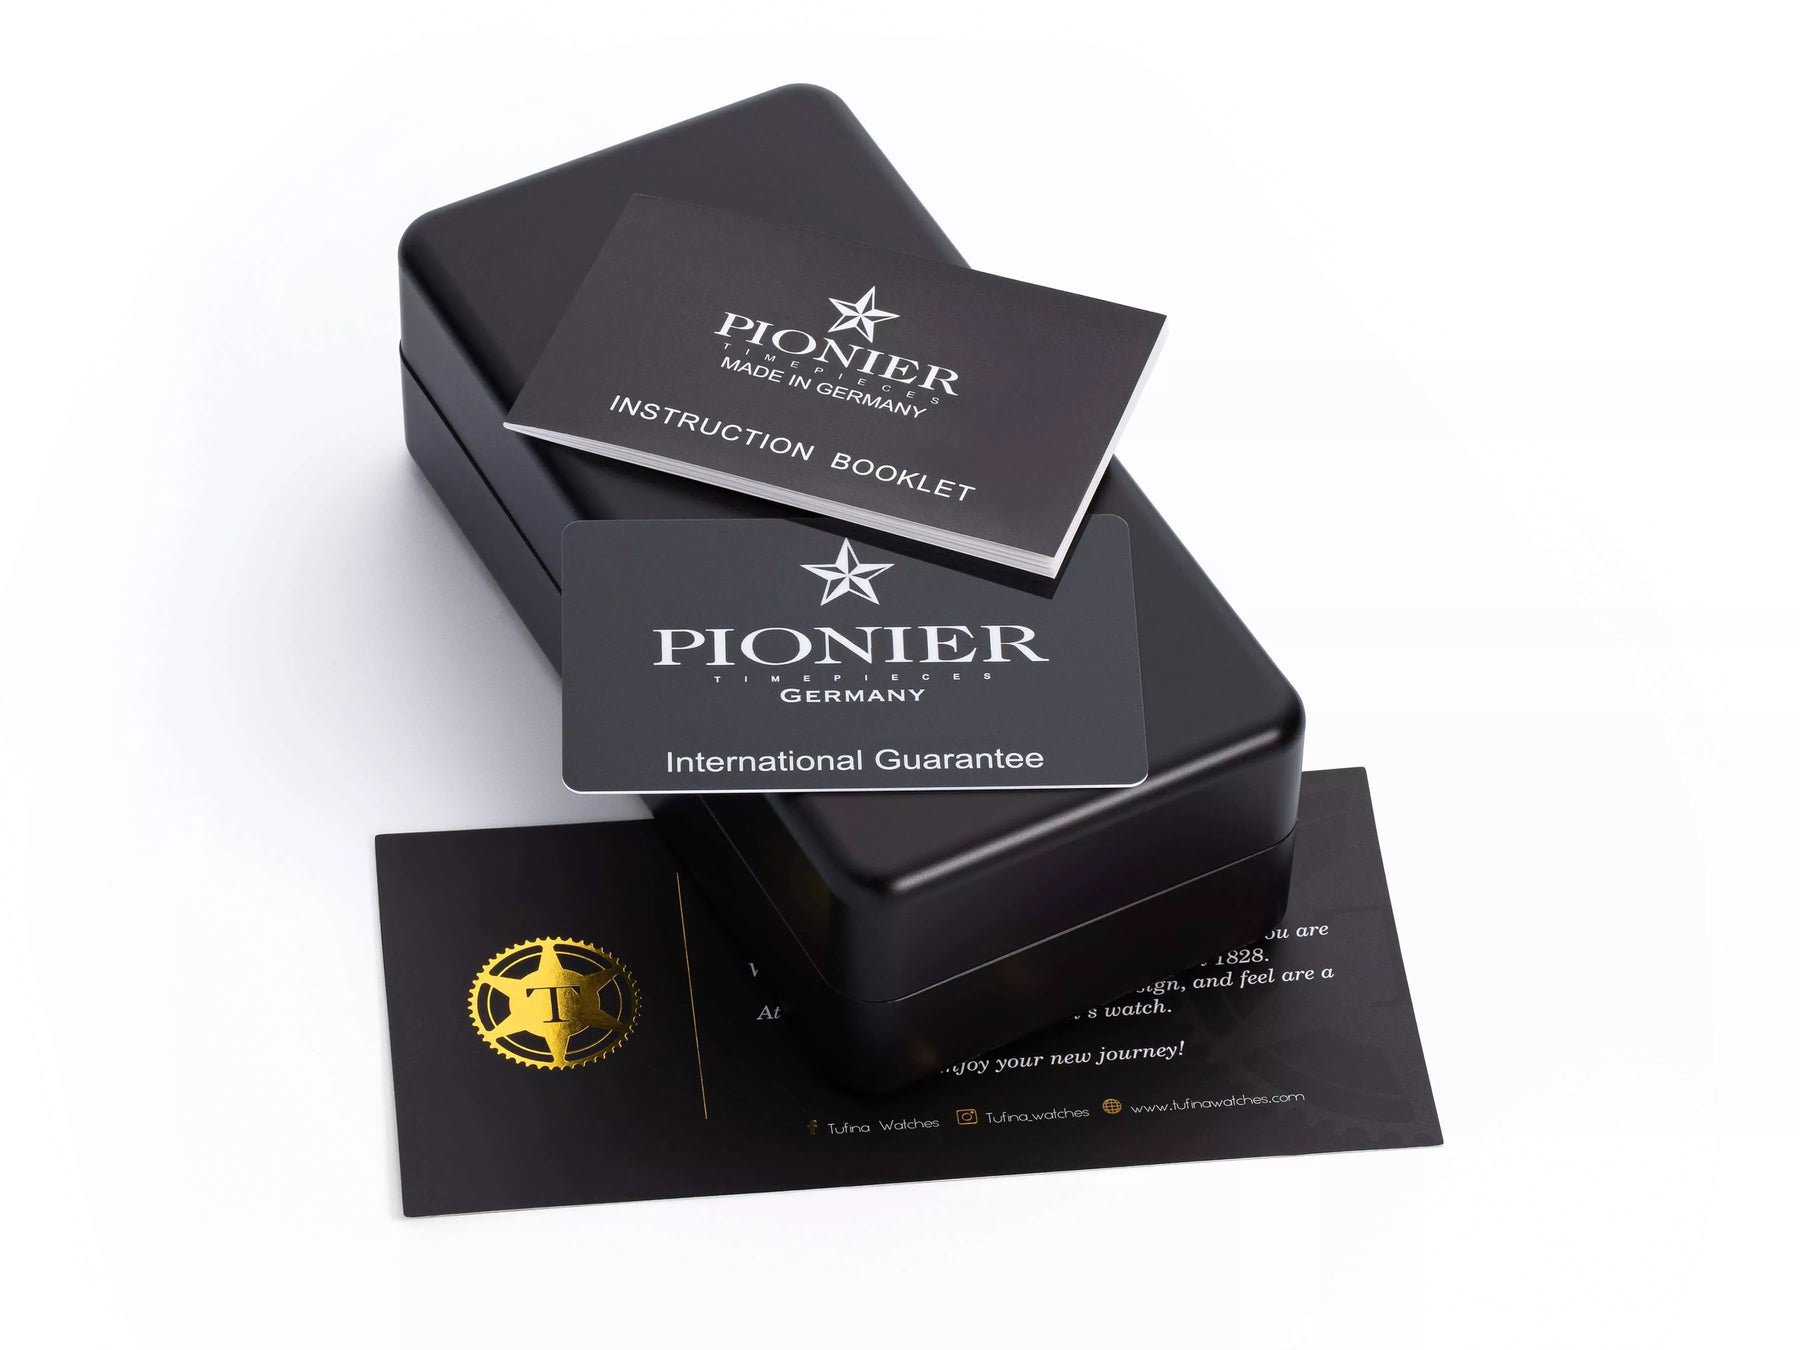 Instruction booklet by Pionier. International guarantee by Pionier. And a greeting card by Tufina.